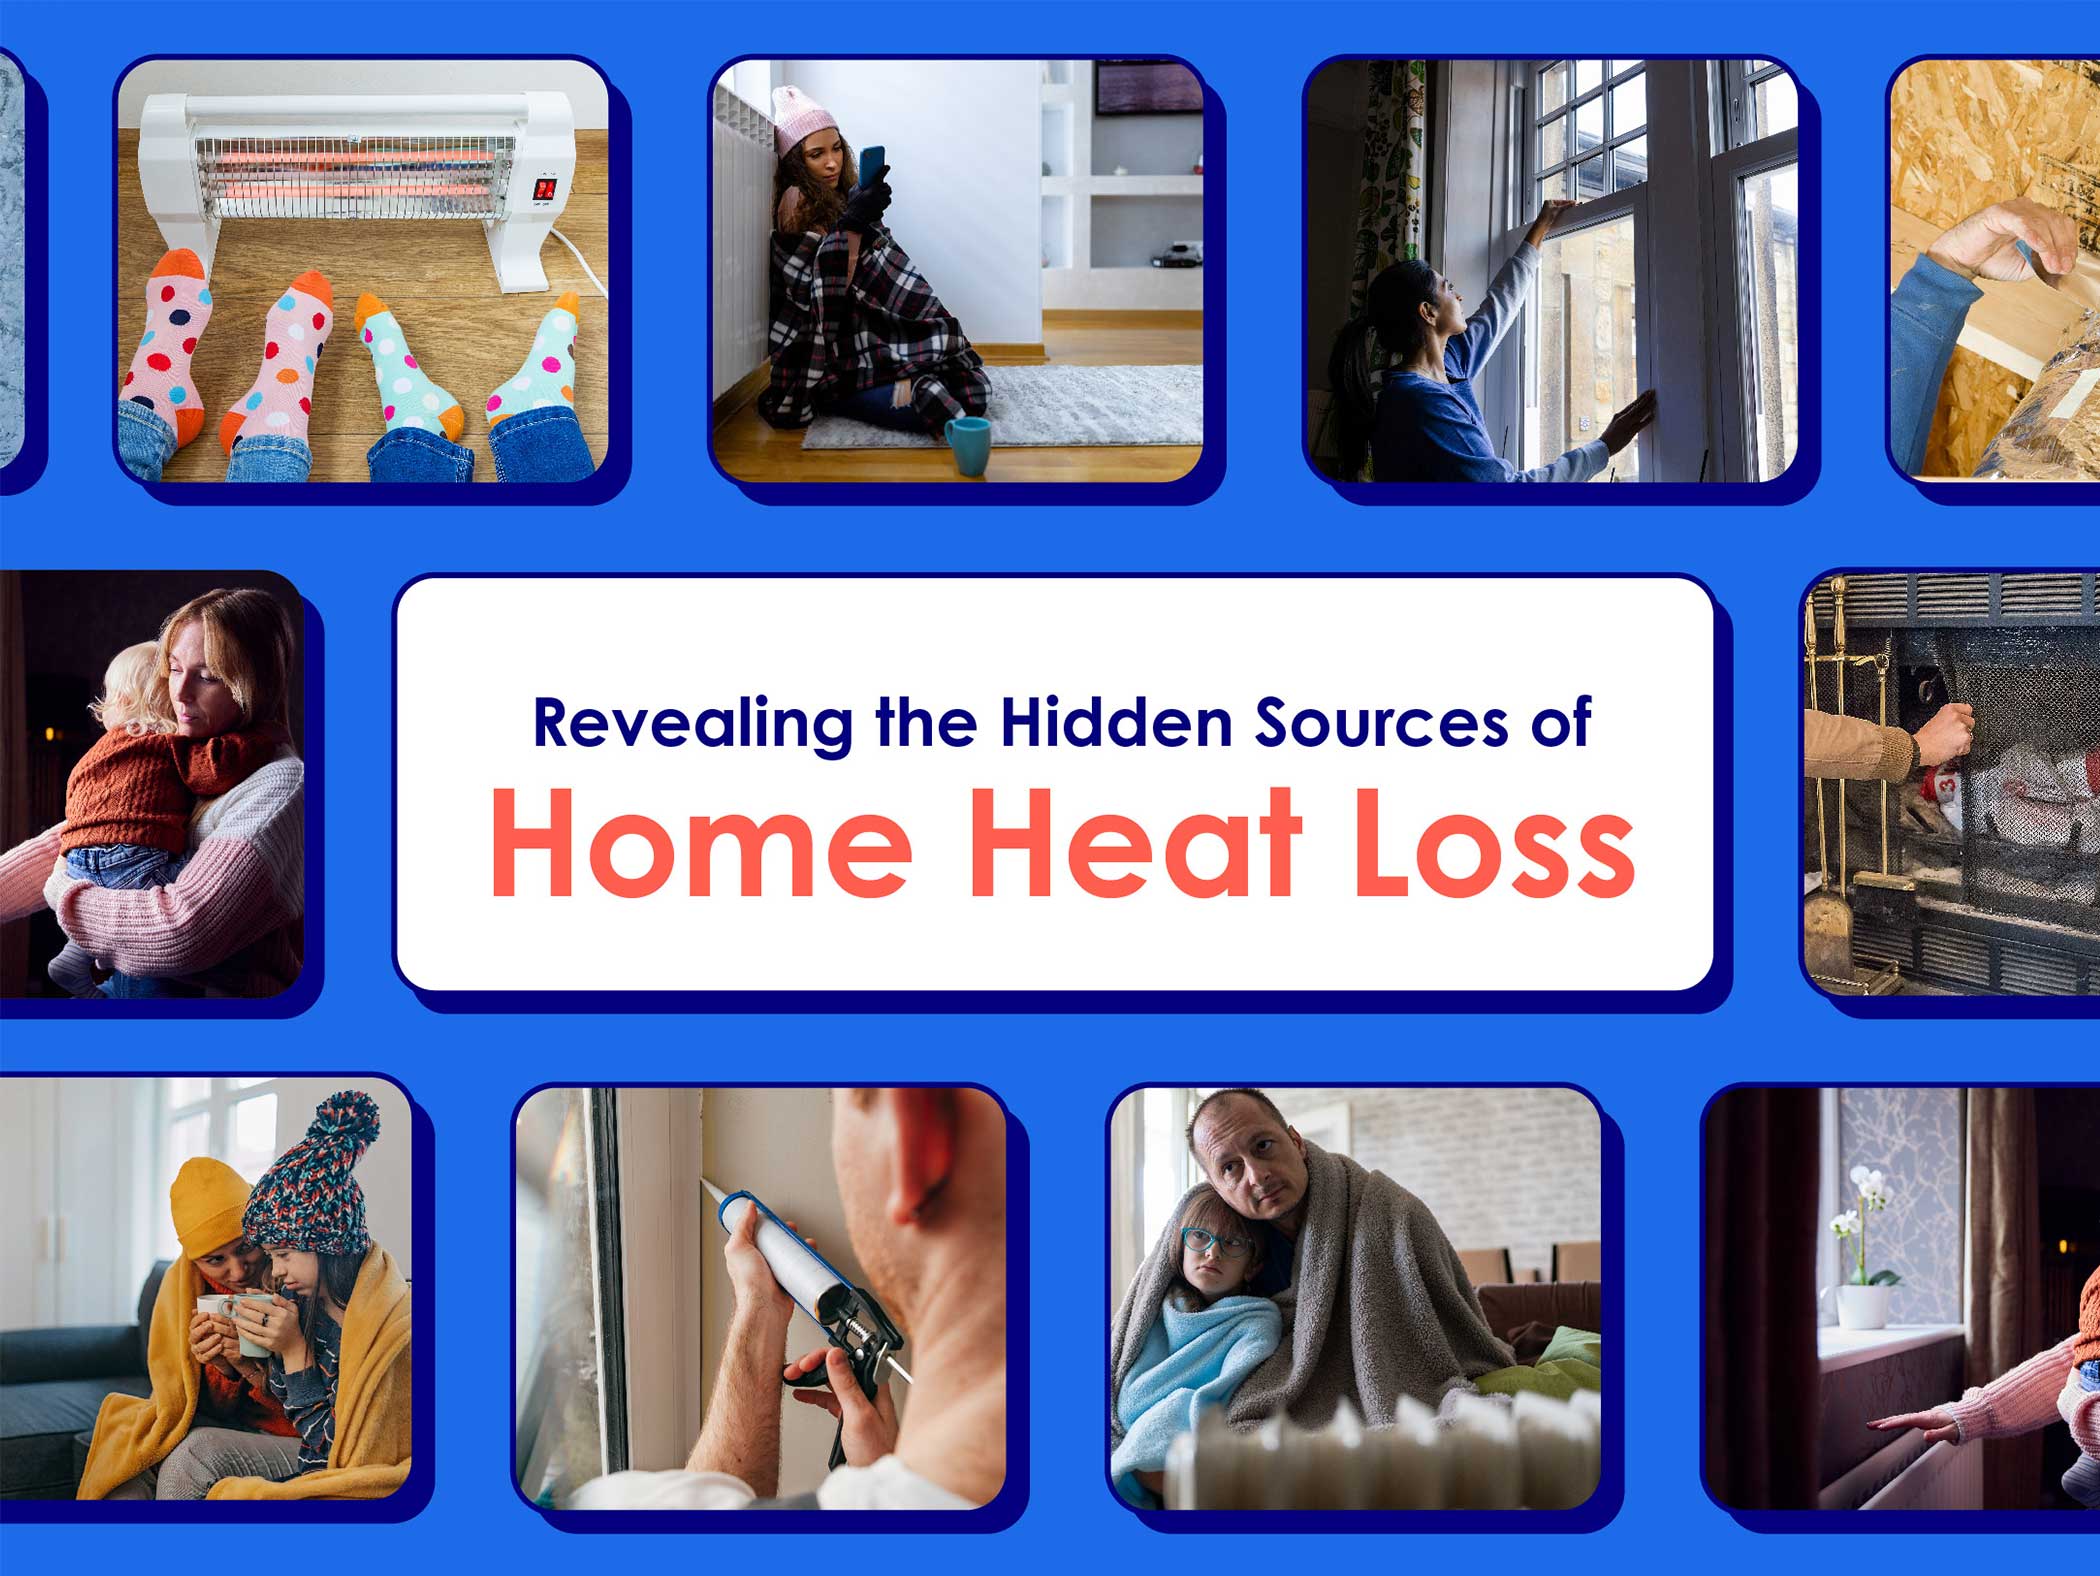 Revealing-the-Hidden-Sources-of-Home-Heat-Loss